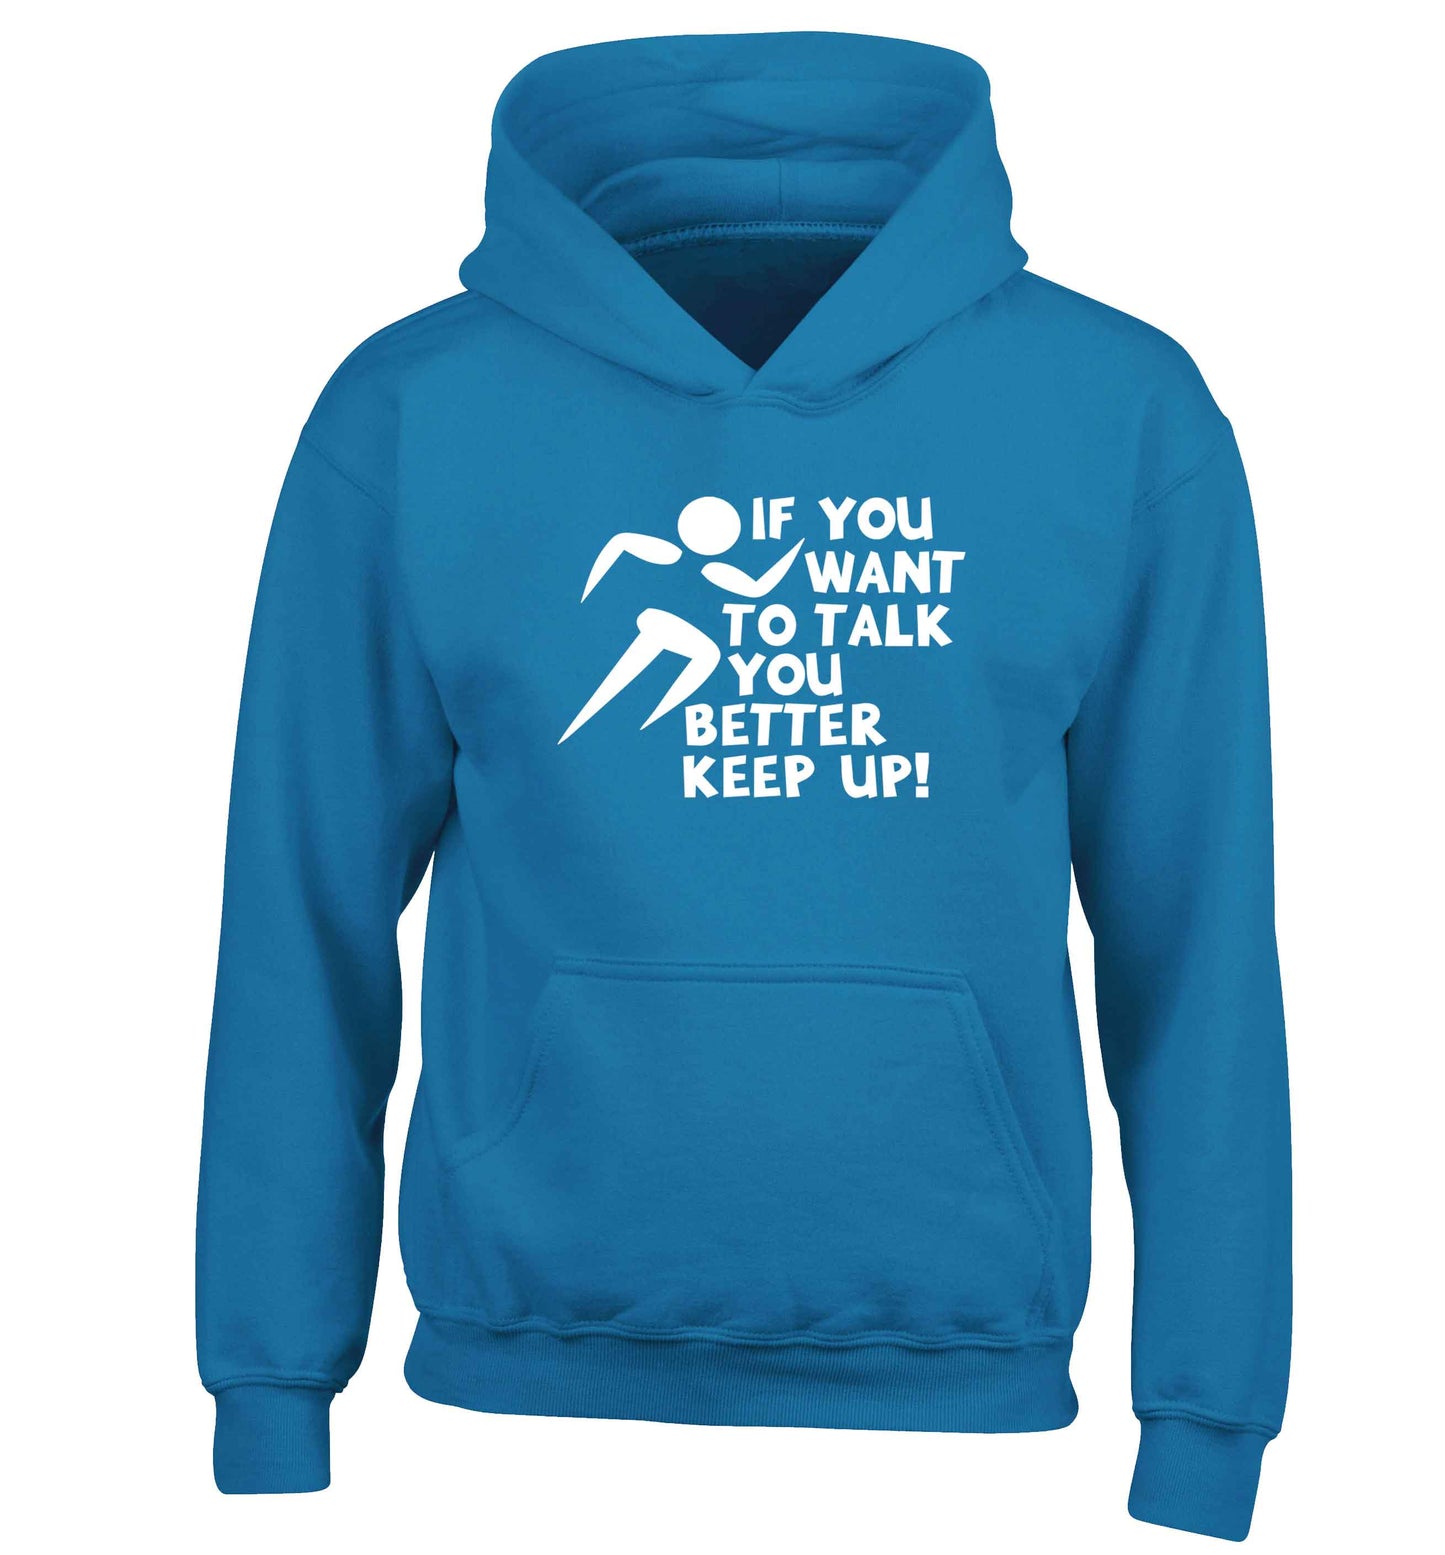 If you want to talk you better keep up! children's blue hoodie 12-13 Years